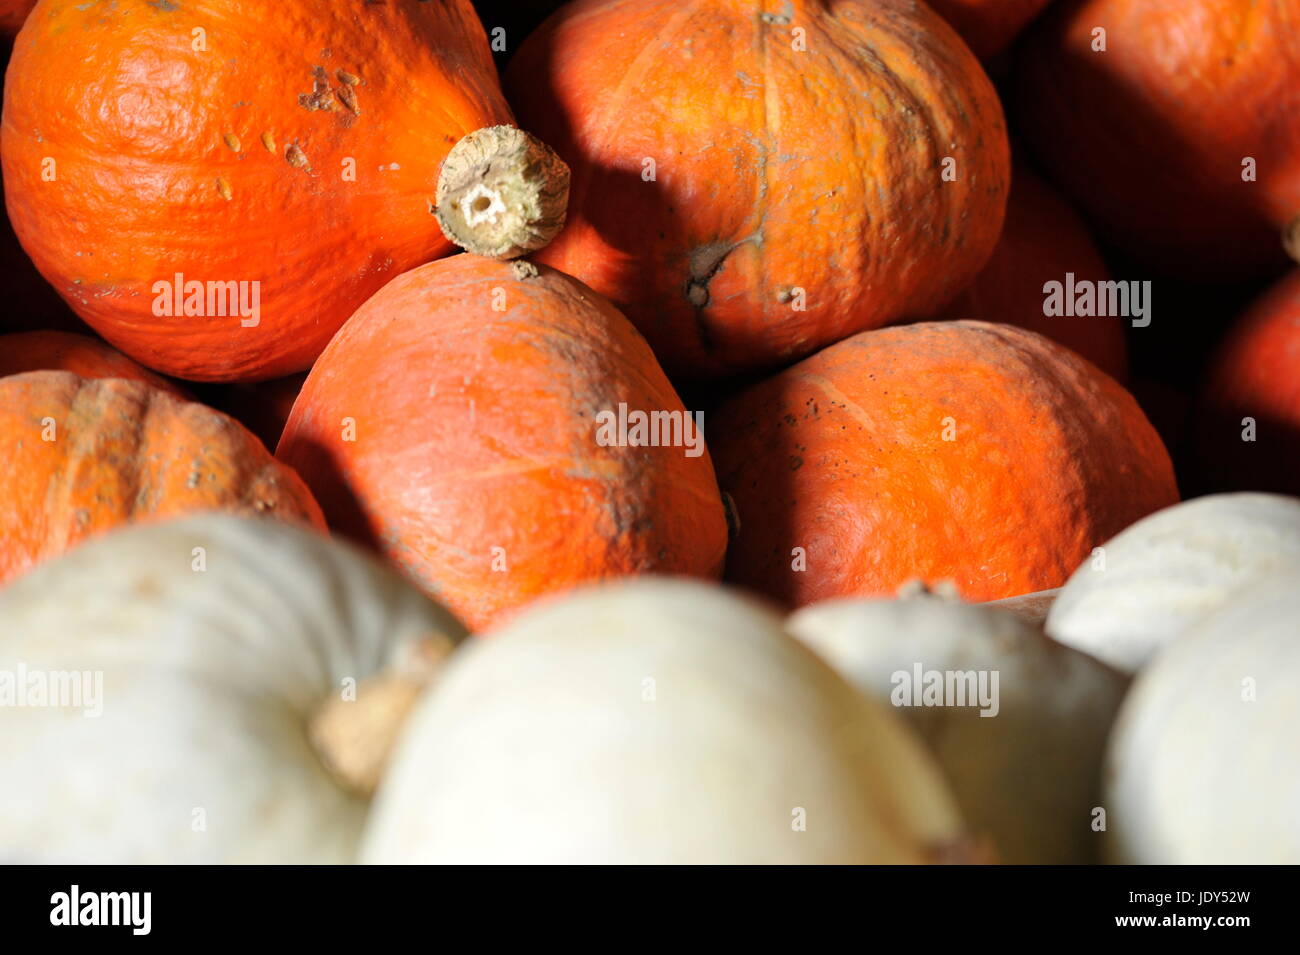 Market stall with squash assortment of various shapes and sizes Stock Photo